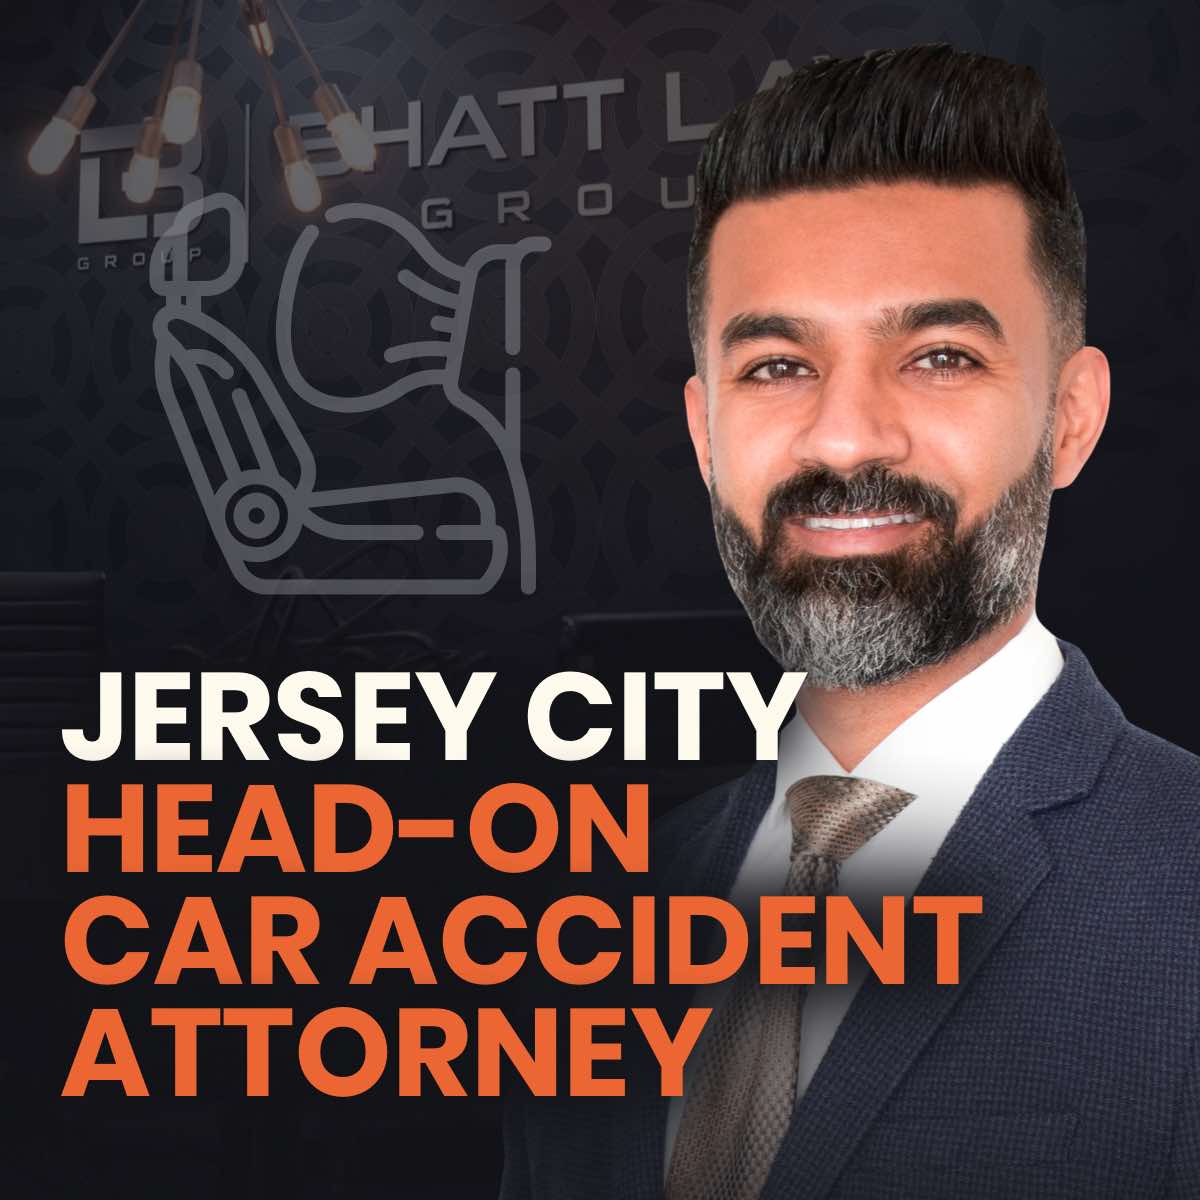 Jersey City Head-On Car Accident Attorney